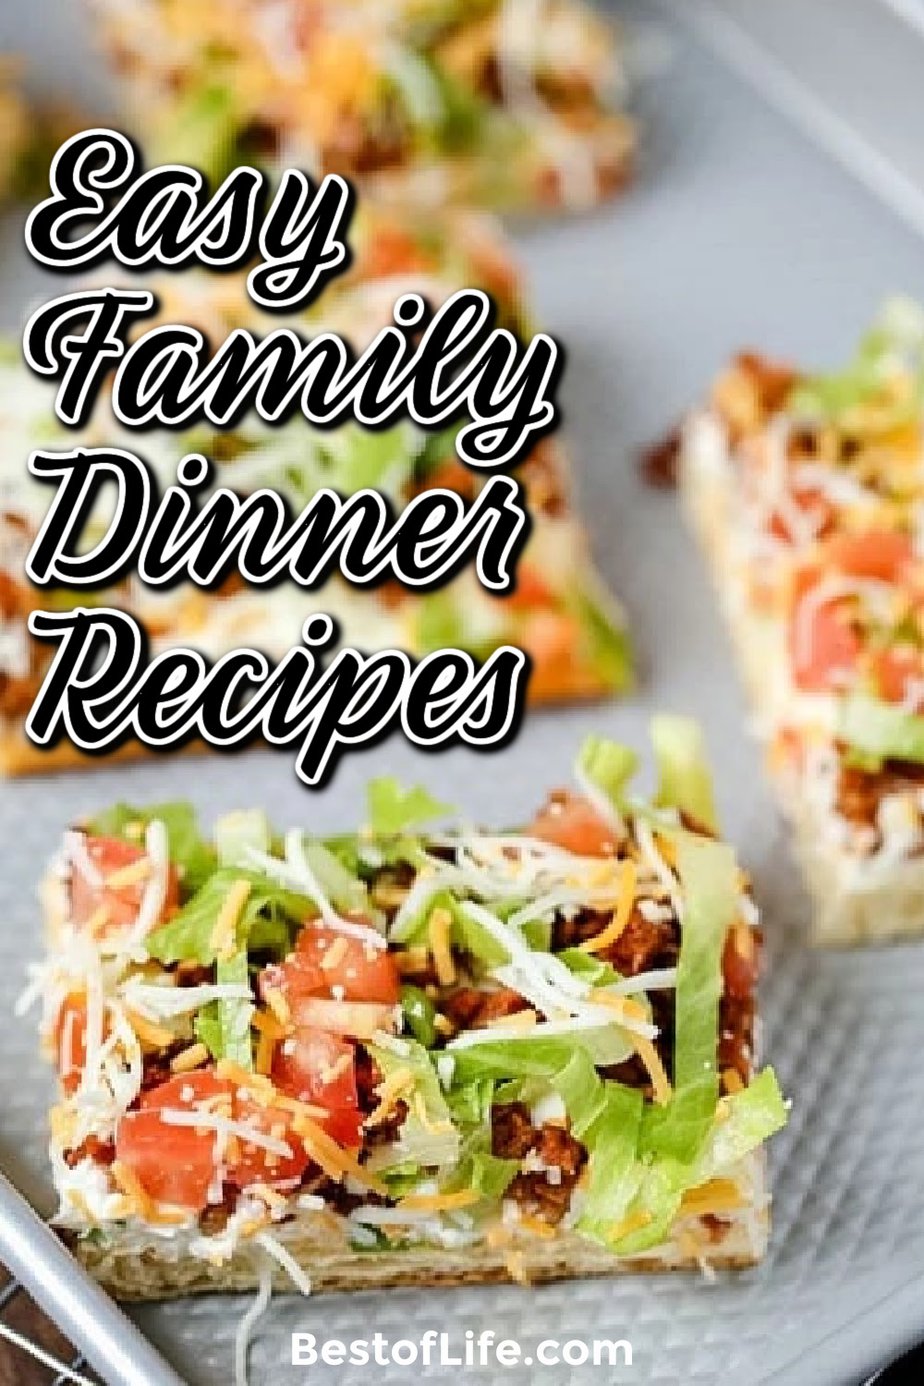 Easy family meals are key to meal planning! Spend less time cooking and more time with your family with these easy family dinner recipes. Easy Recipes | Main Dish Recipes | Family Recipes | Family Meal Planning | Dinner Recipes | Recipes for Families | Recipes with Chicken | Recipes with Beef | Healthy Dinner Recipes | Easy Dinner Recipes #dinnerrecipes #familydinner via @thebestoflife